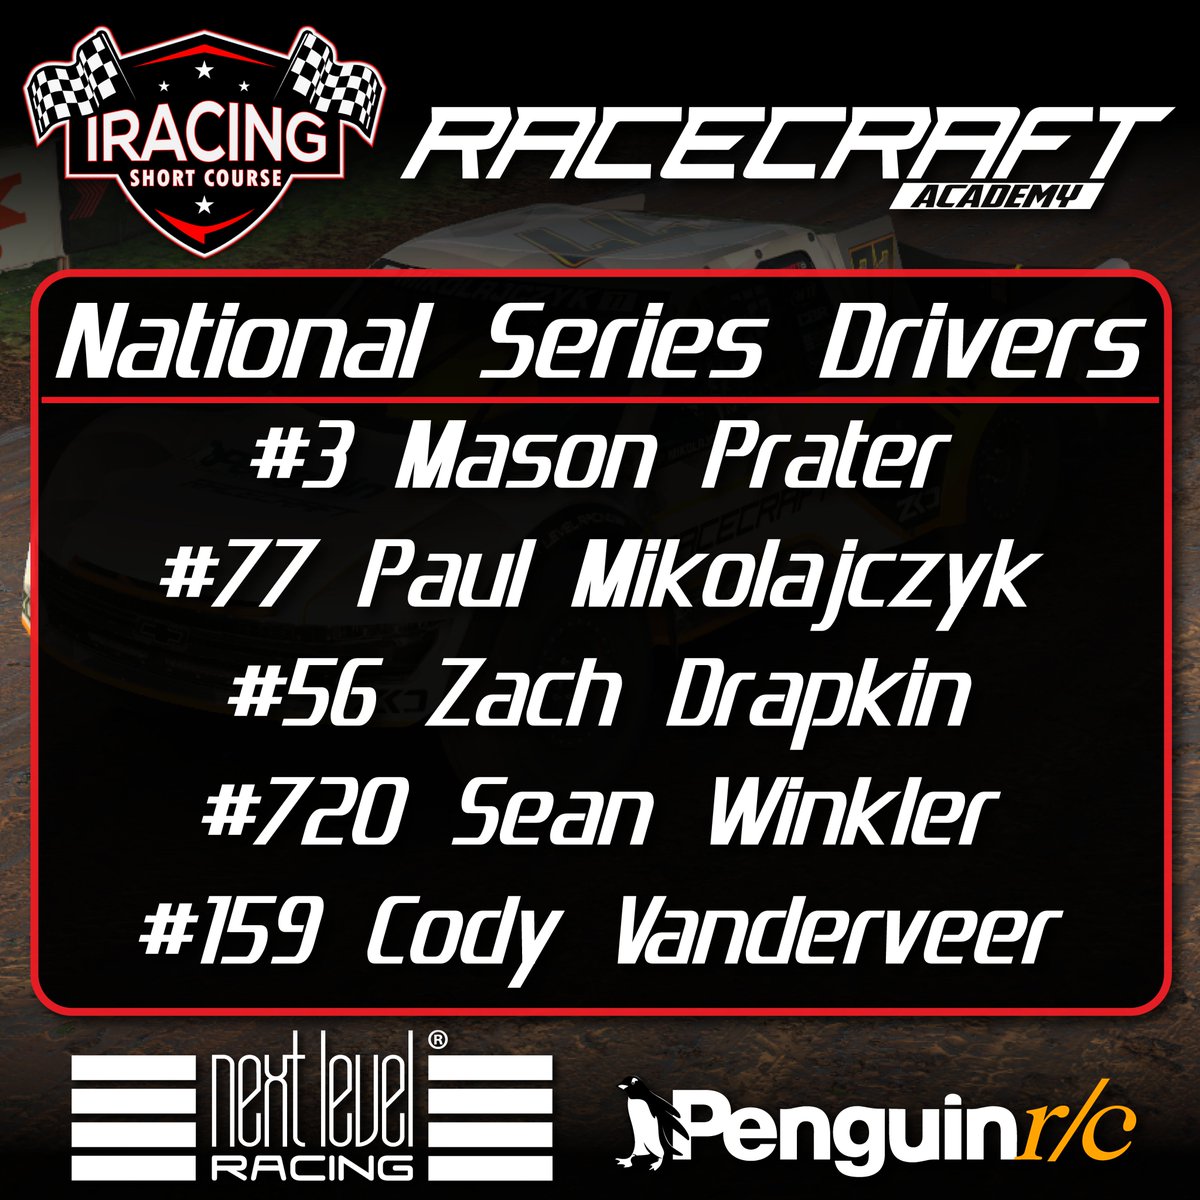 It is finally race day for the @iRacingshort 2024 National Series! We got a stacked 5 driver team lineup ready to go! Tune in tonight at 7pm PST and cheer us on!